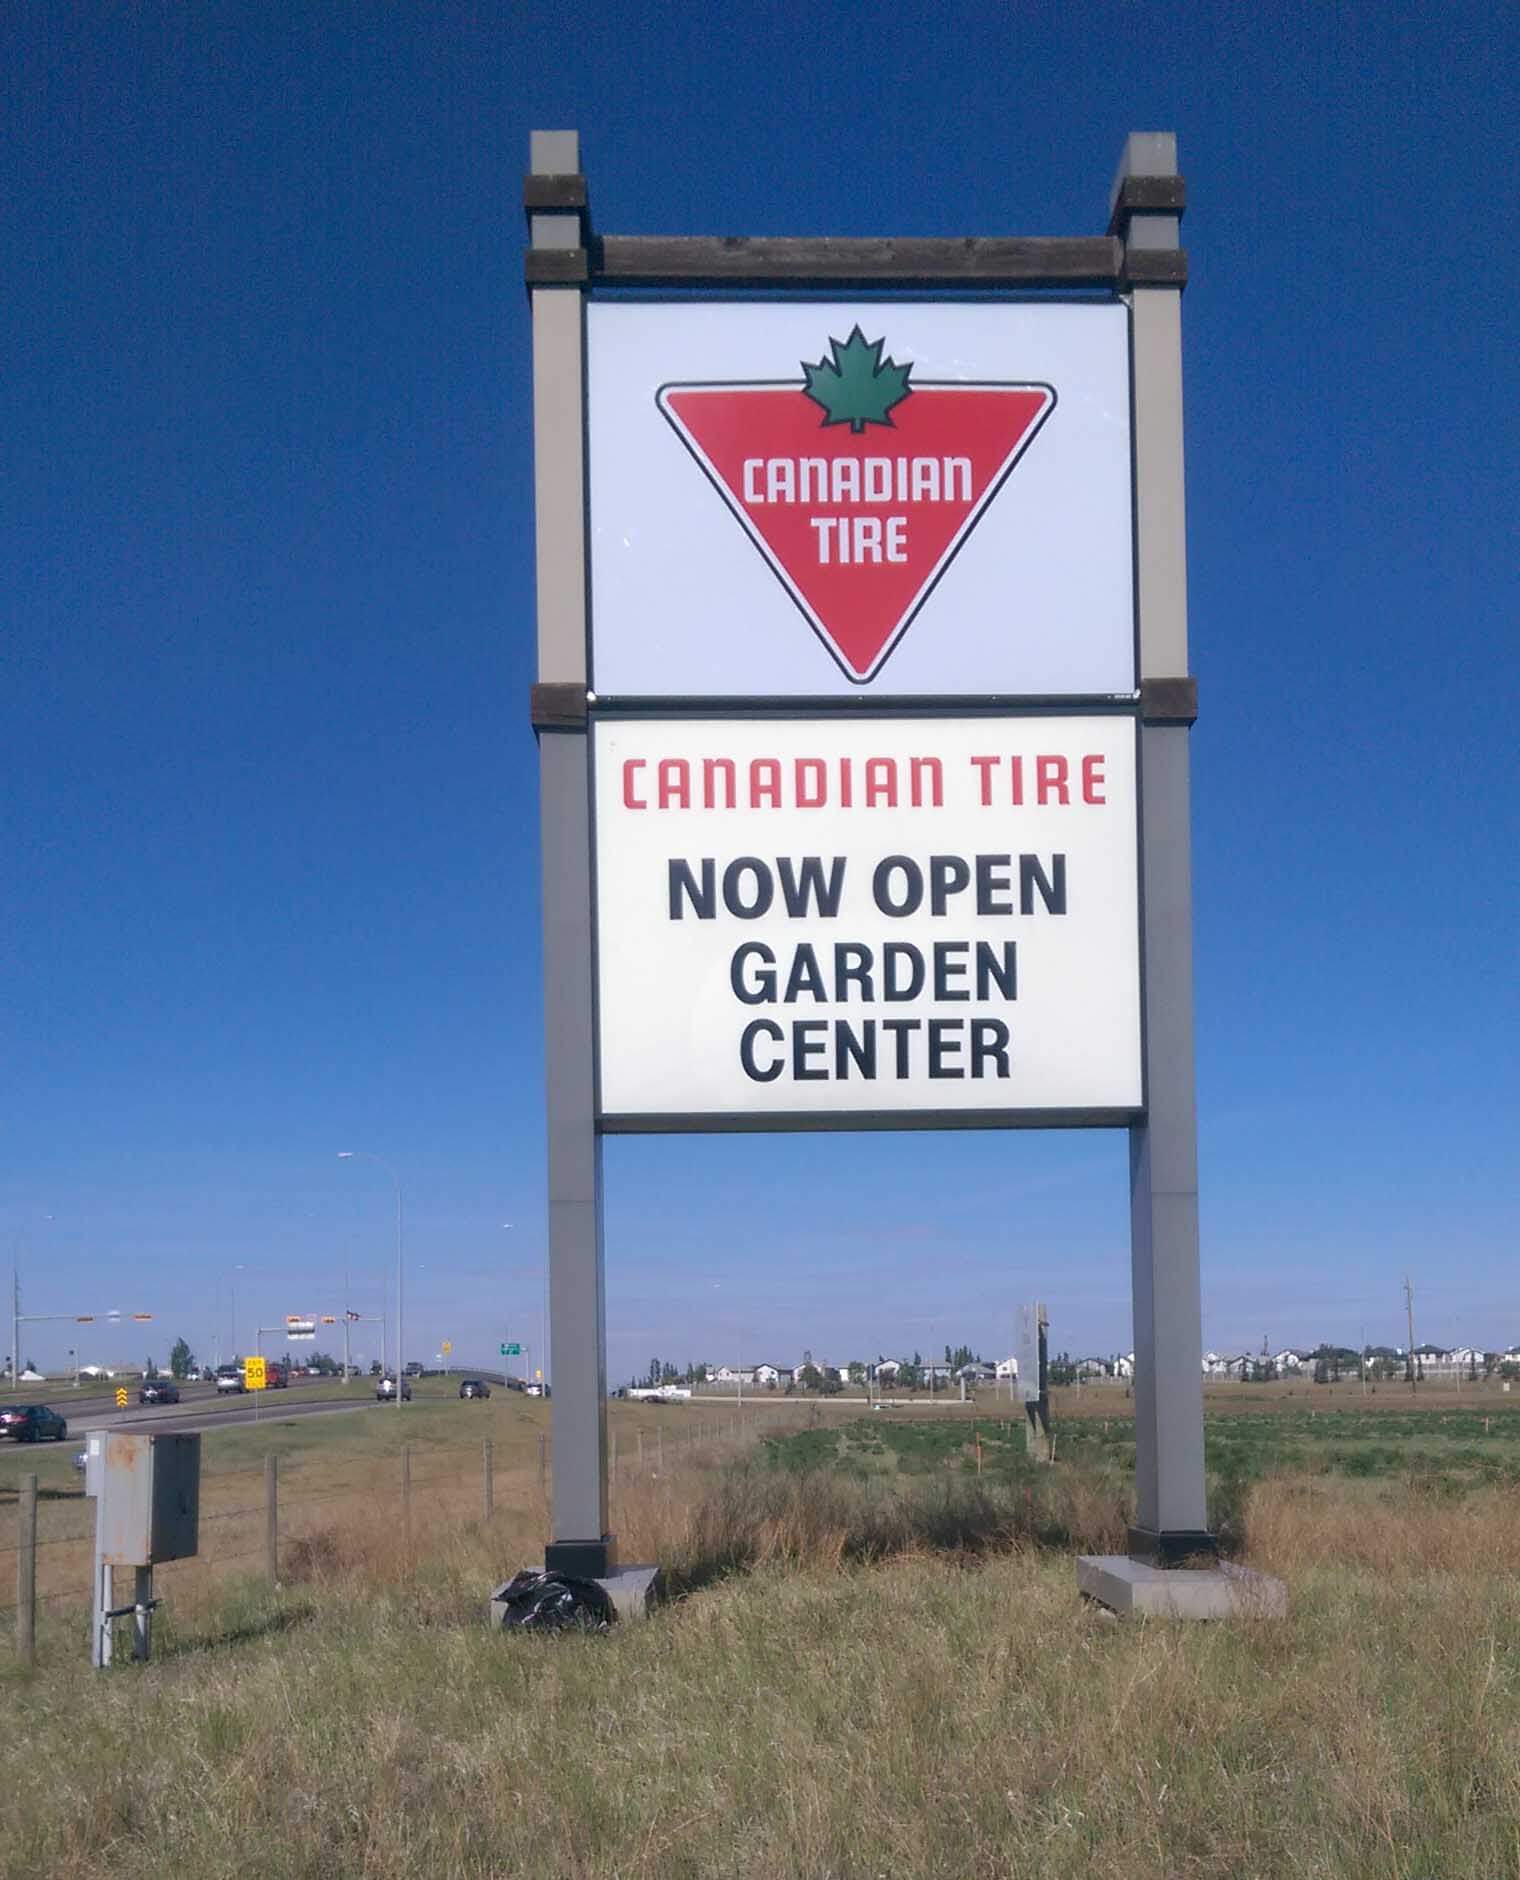 Cut vinyl lettering applied to existing sign face advertising the opening of the Canadian Tire Garden Center.